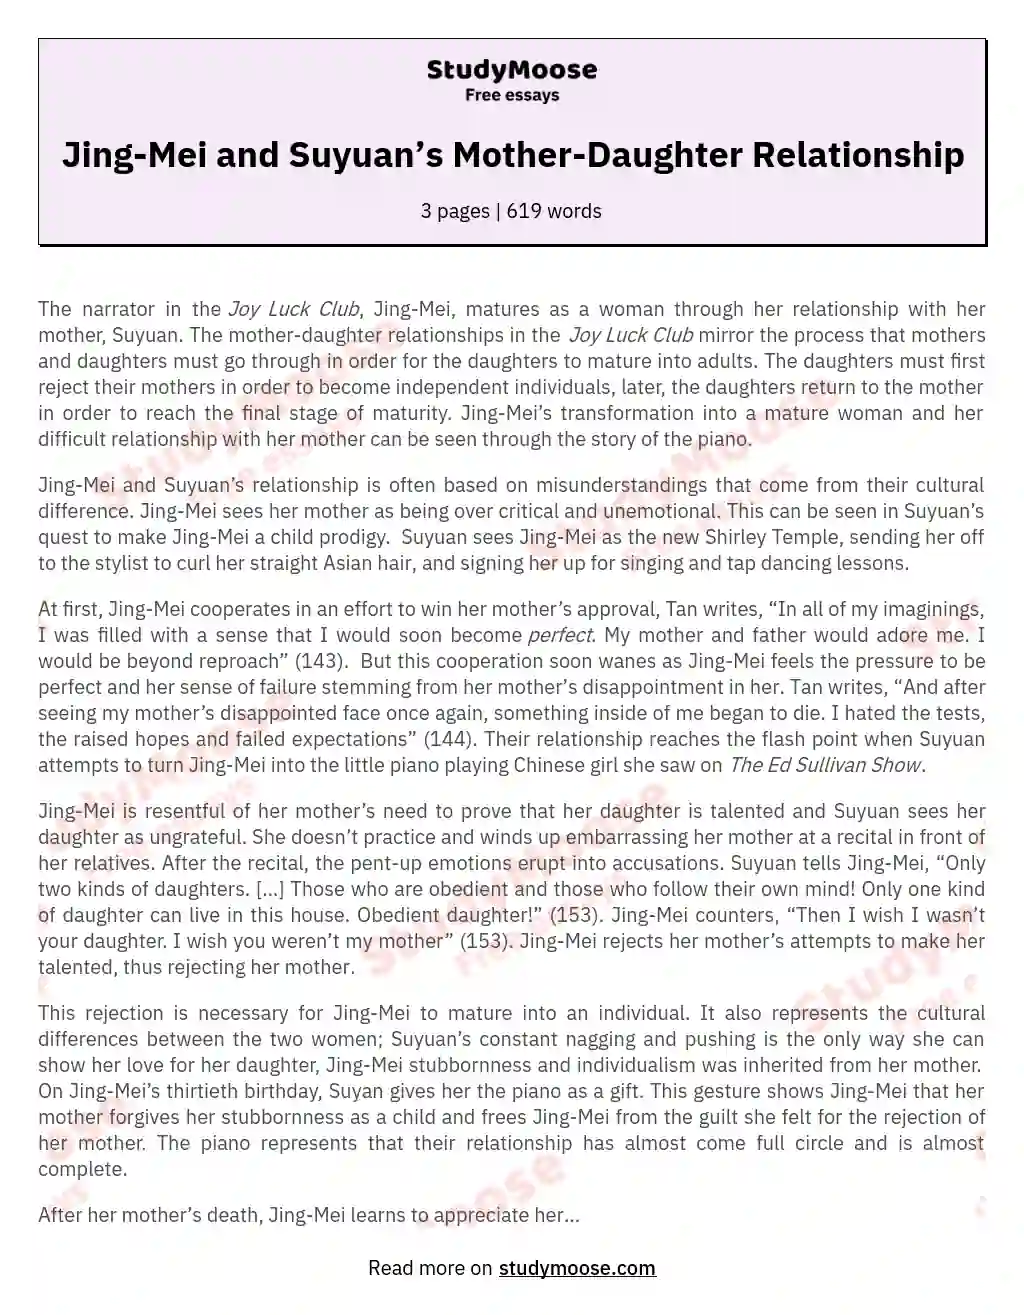 Jing-Mei and Suyuan’s Mother-Daughter Relationship essay